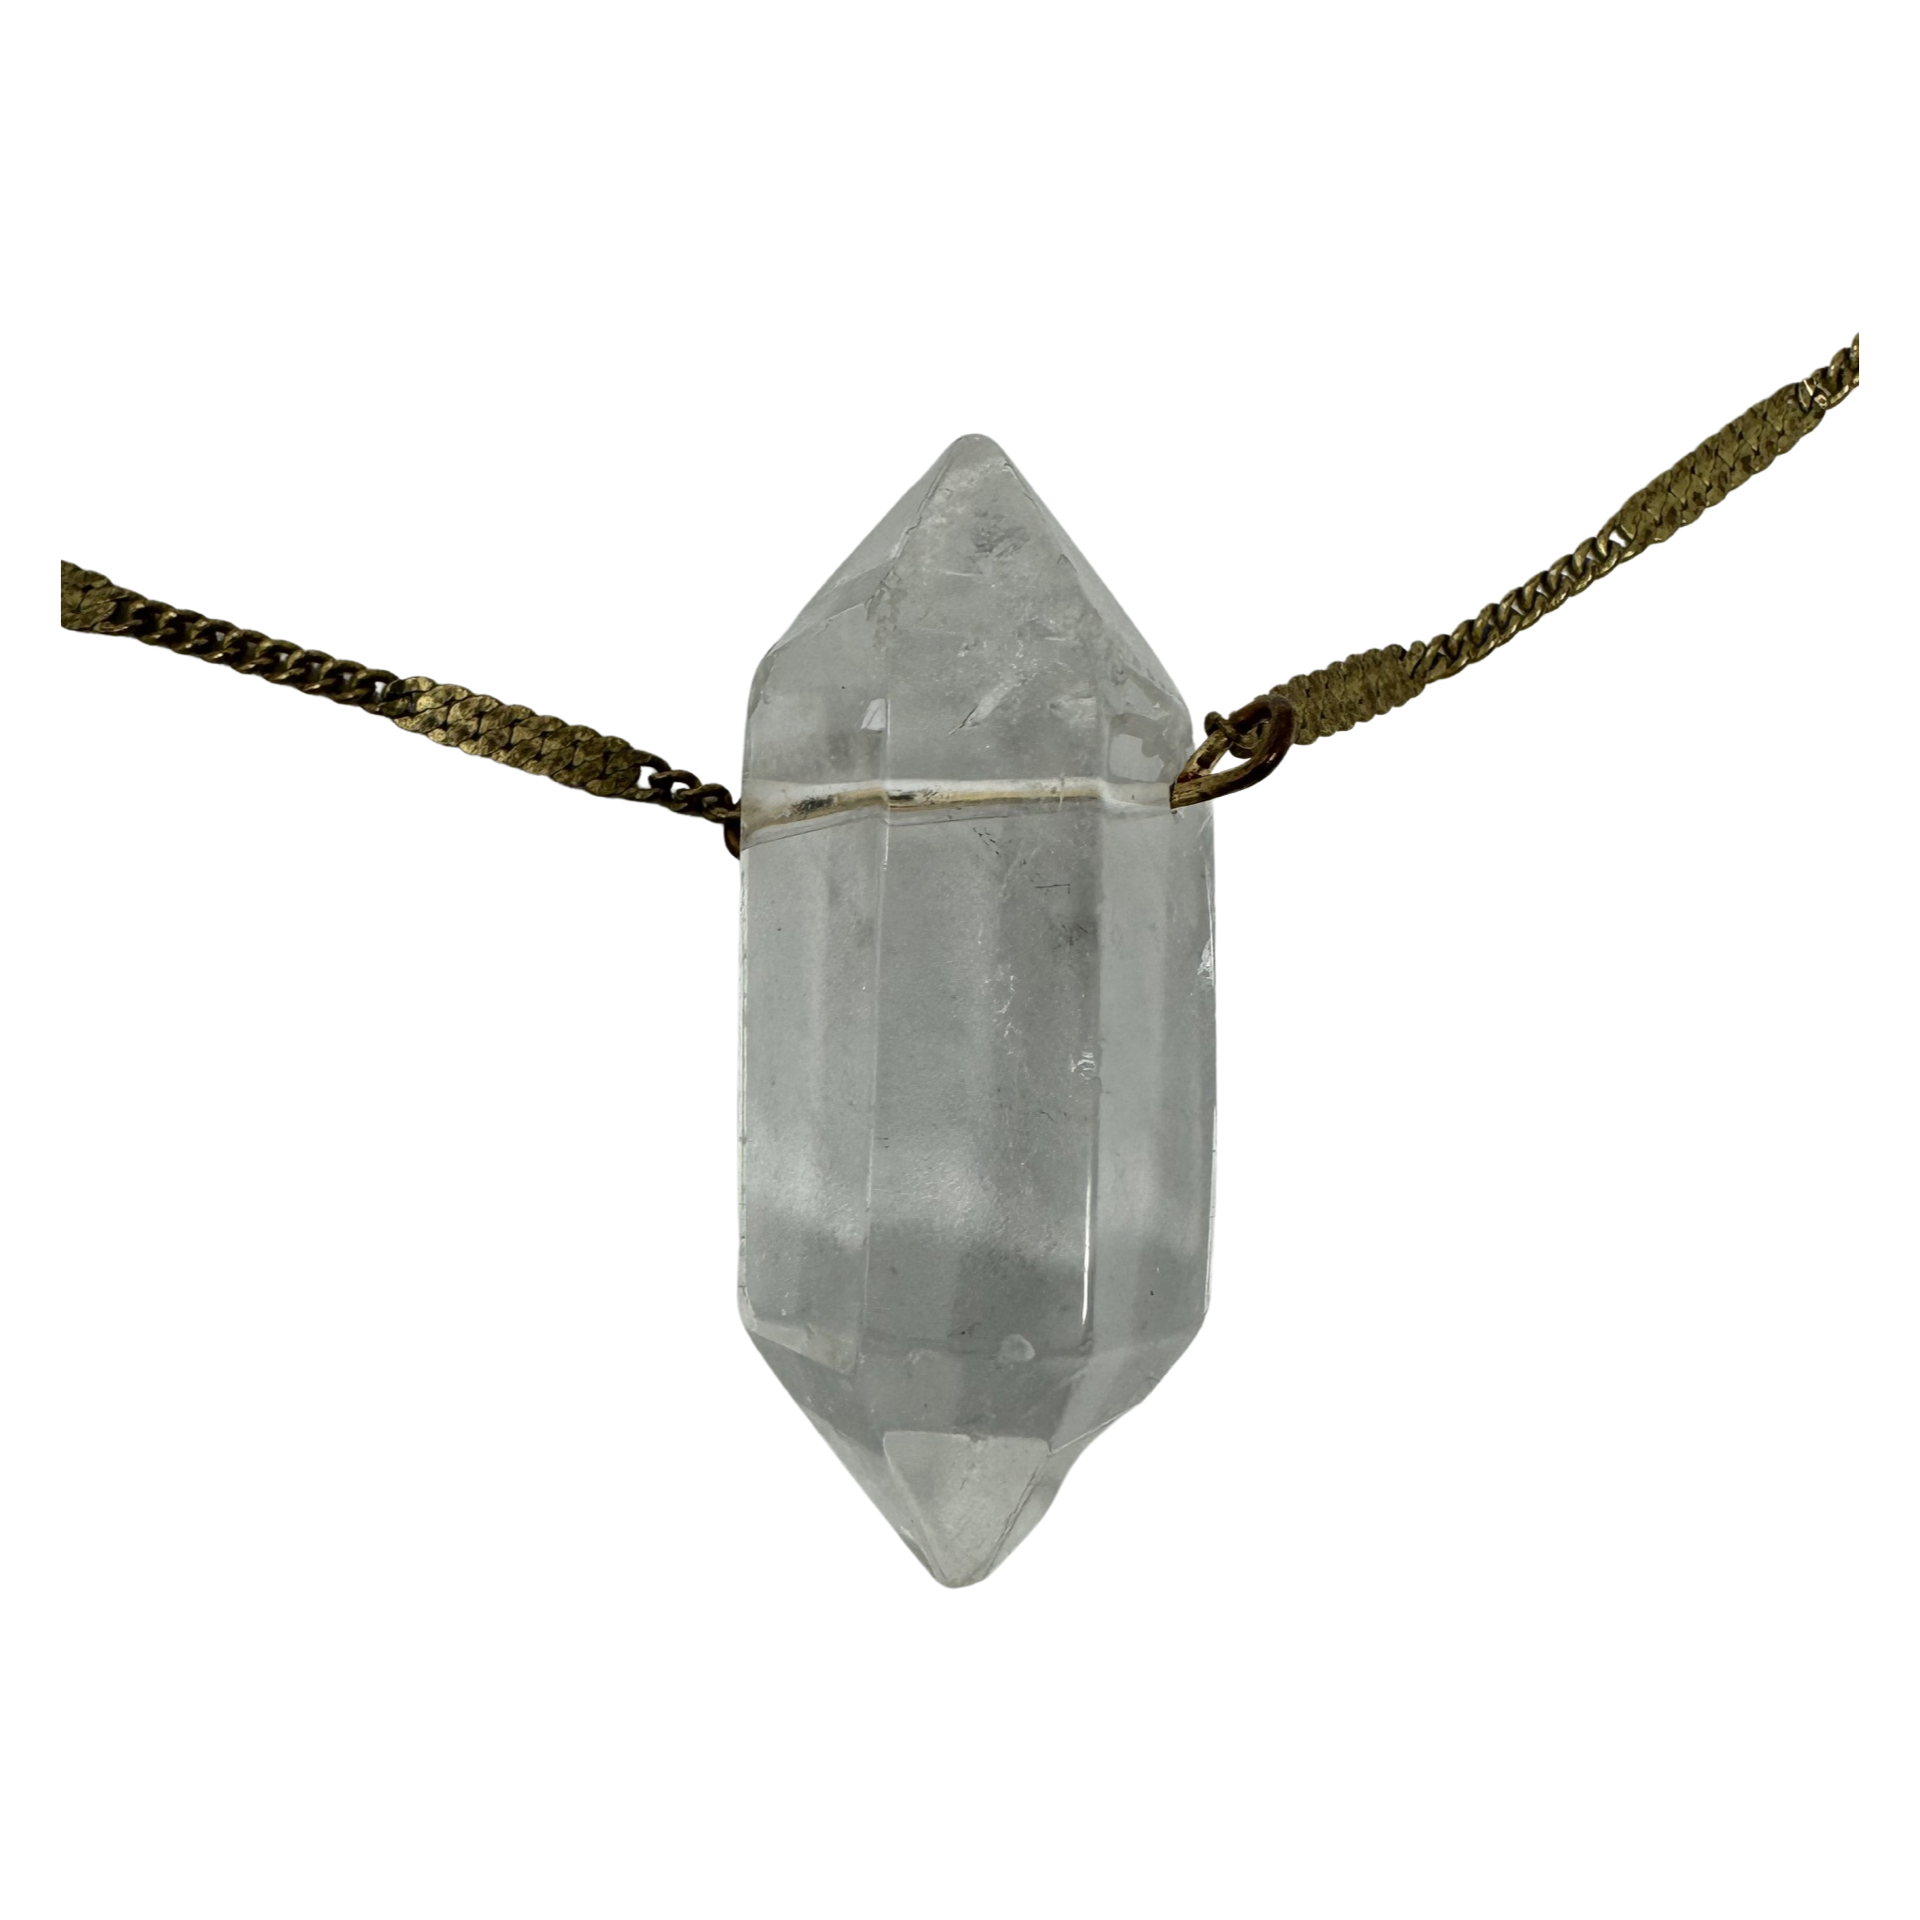 Long Crystal Pendant Necklace